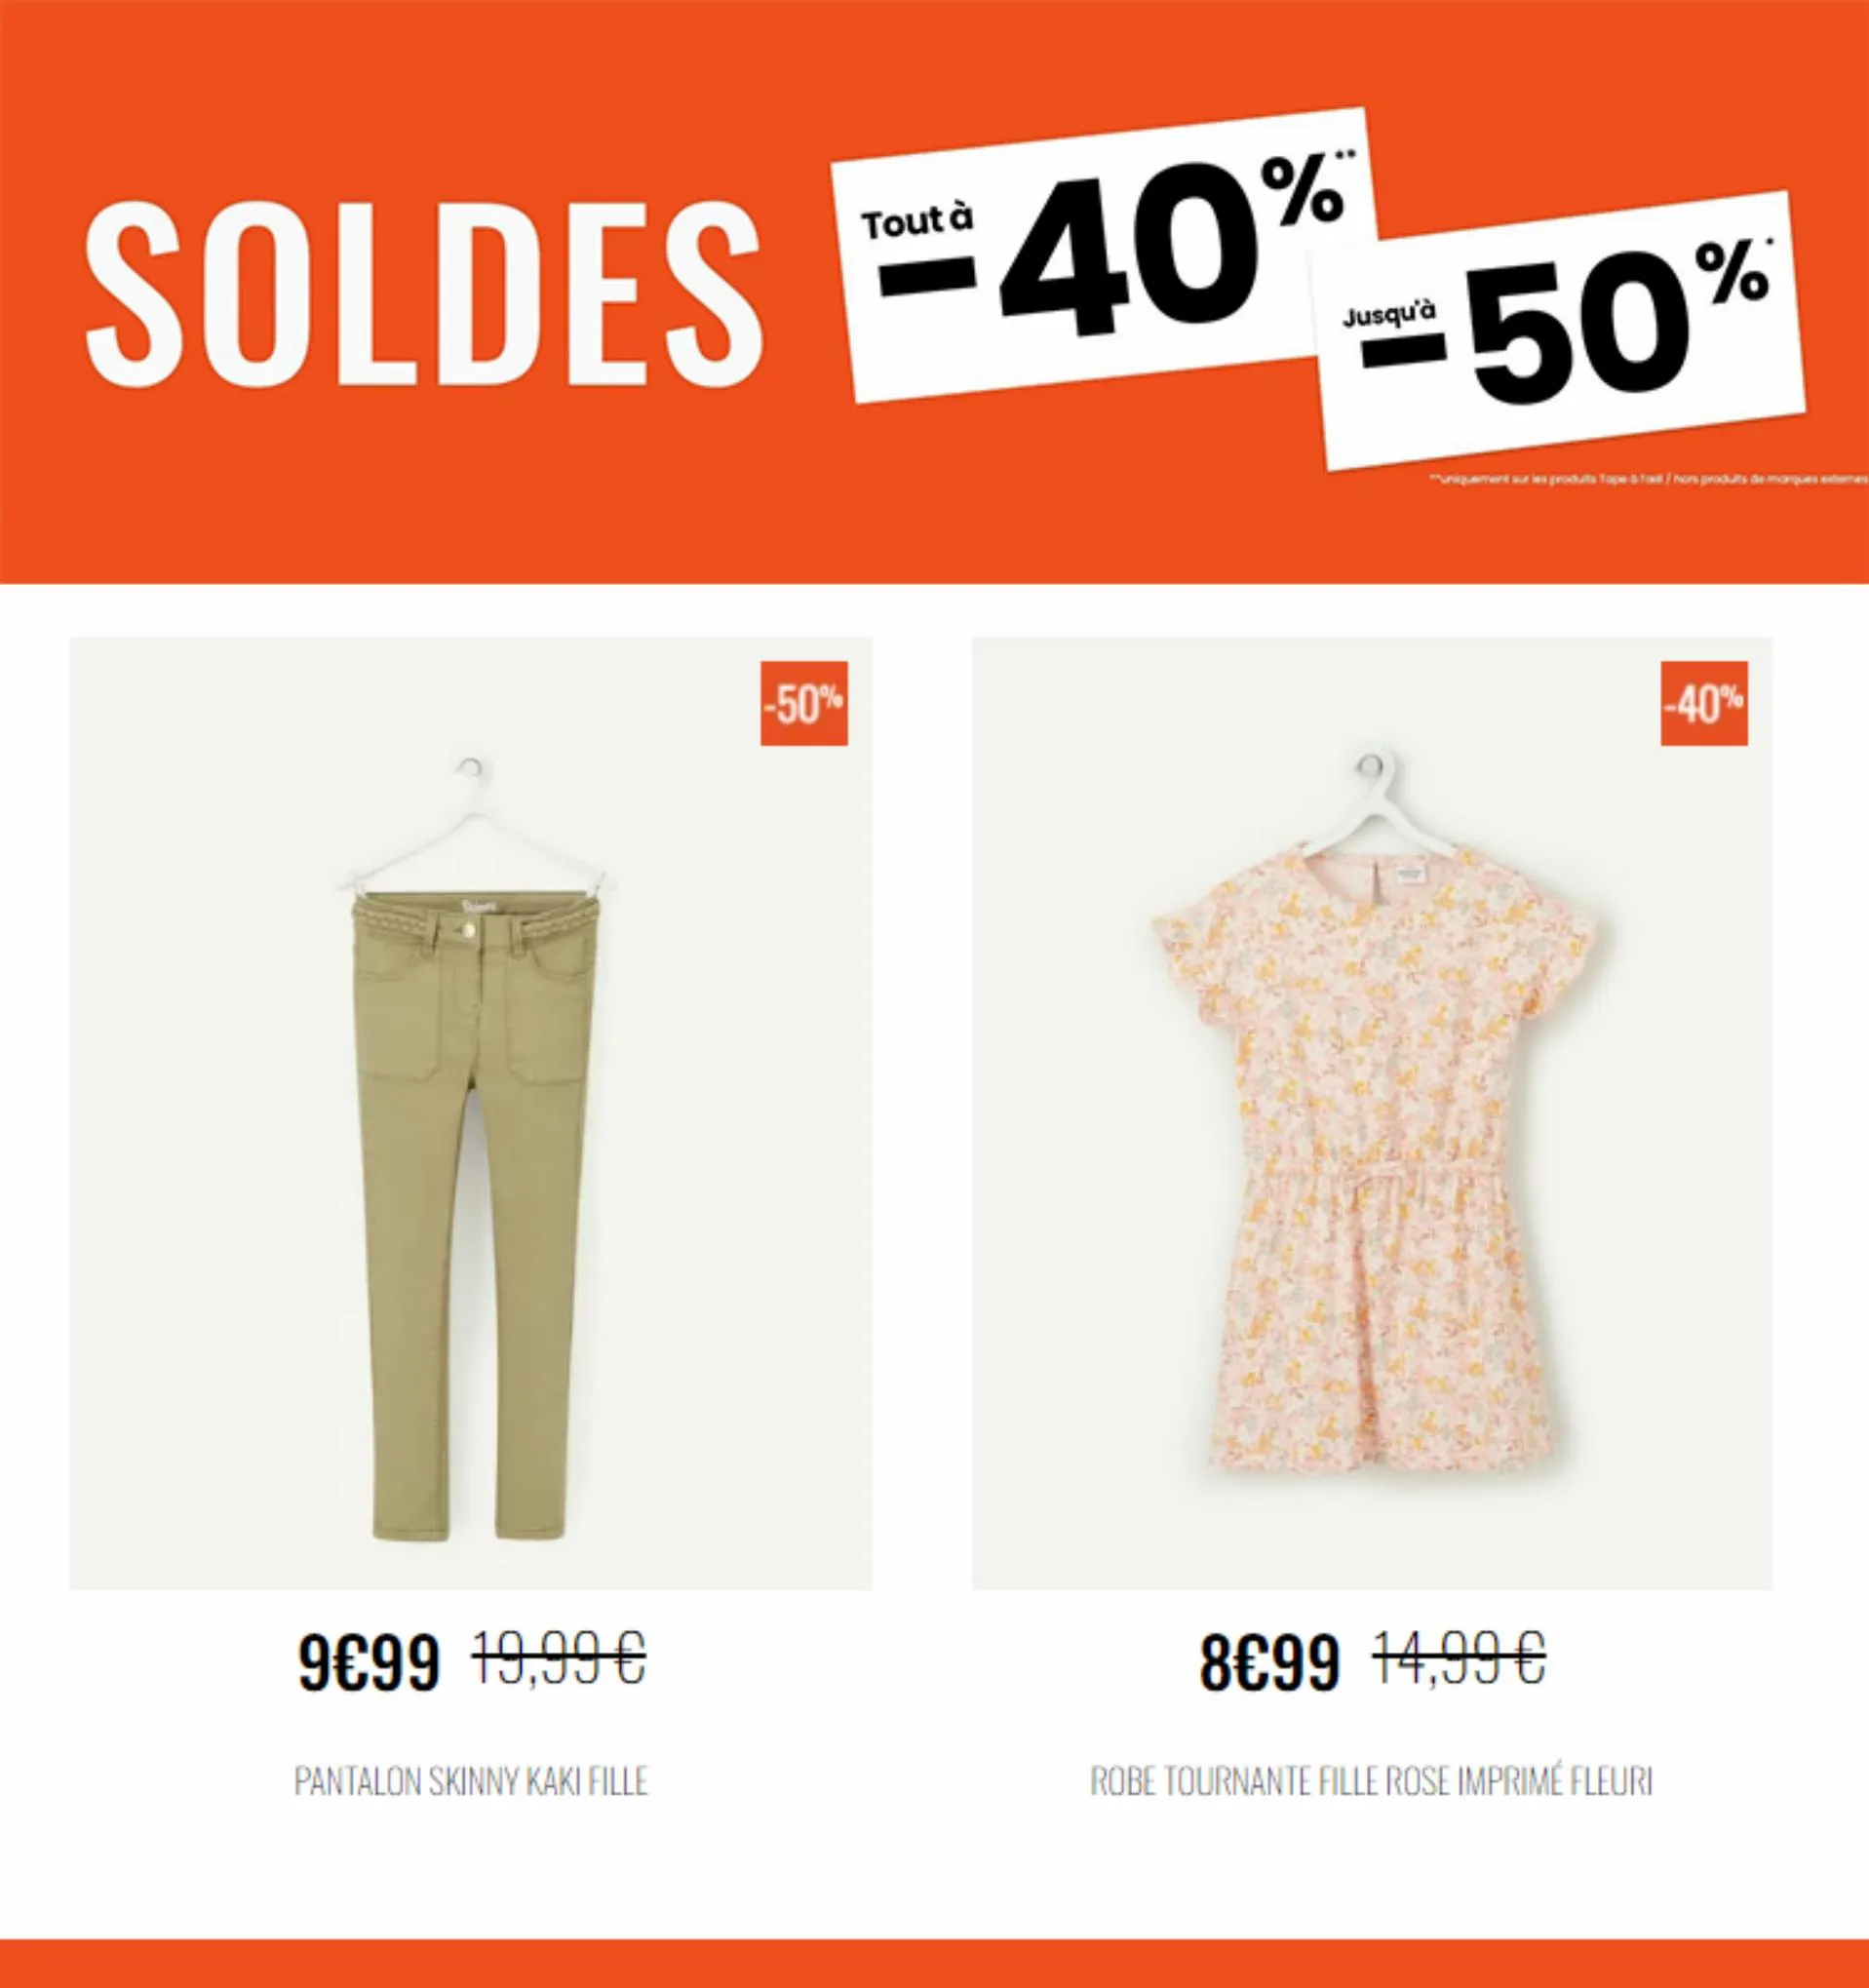 Catalogue SOLDES -40% -50%!, page 00003